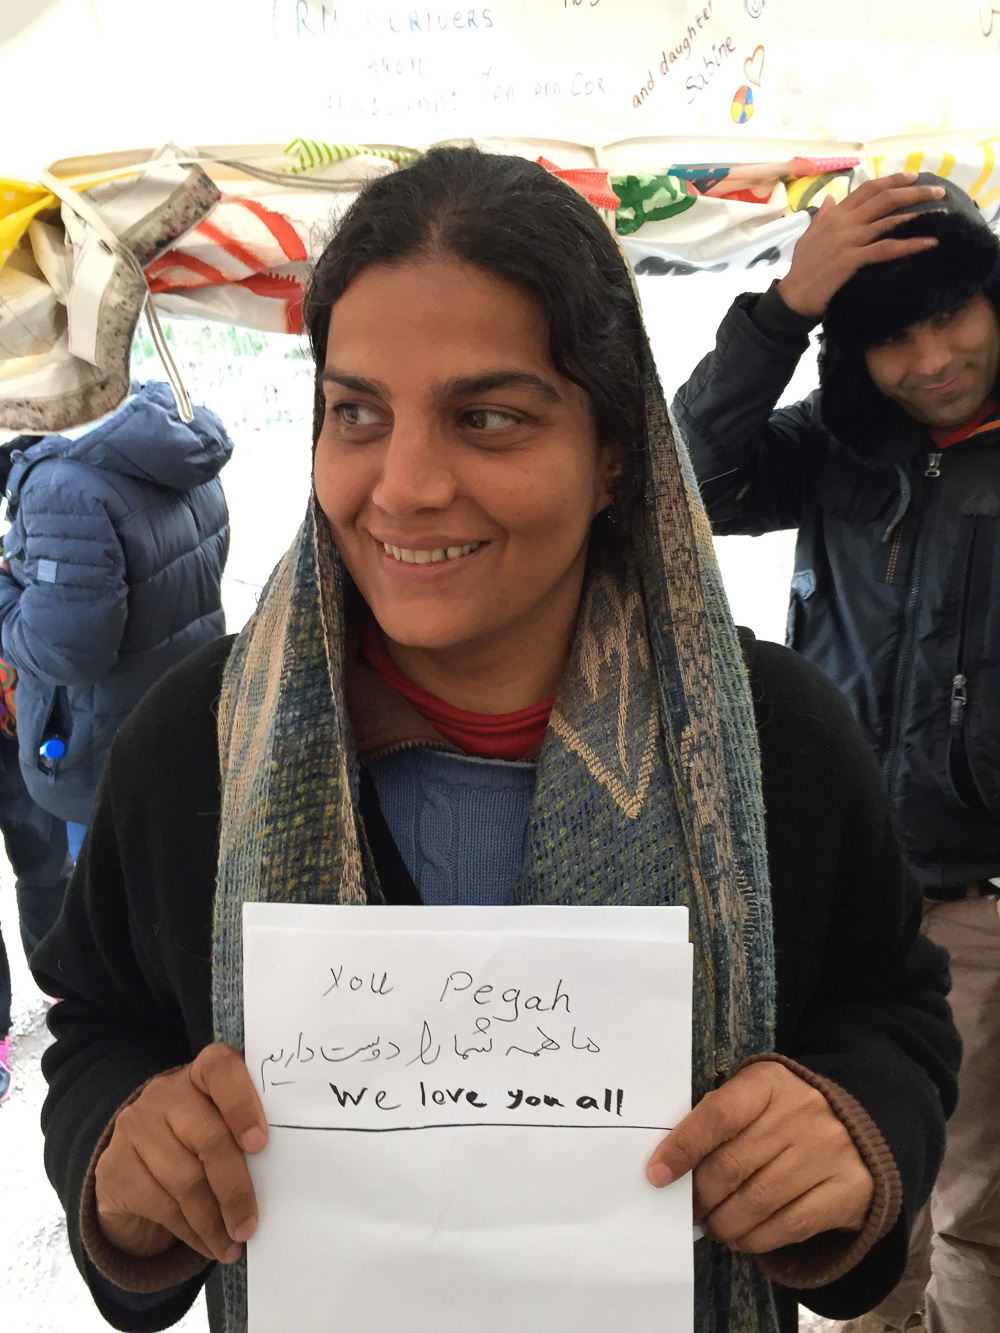 @ Wayne Martin Belger, Afghani woman holding up her "Words from the Heart" after "Us & Them" photo shoot in the Moria refugee camp in Lesbos, Greece.